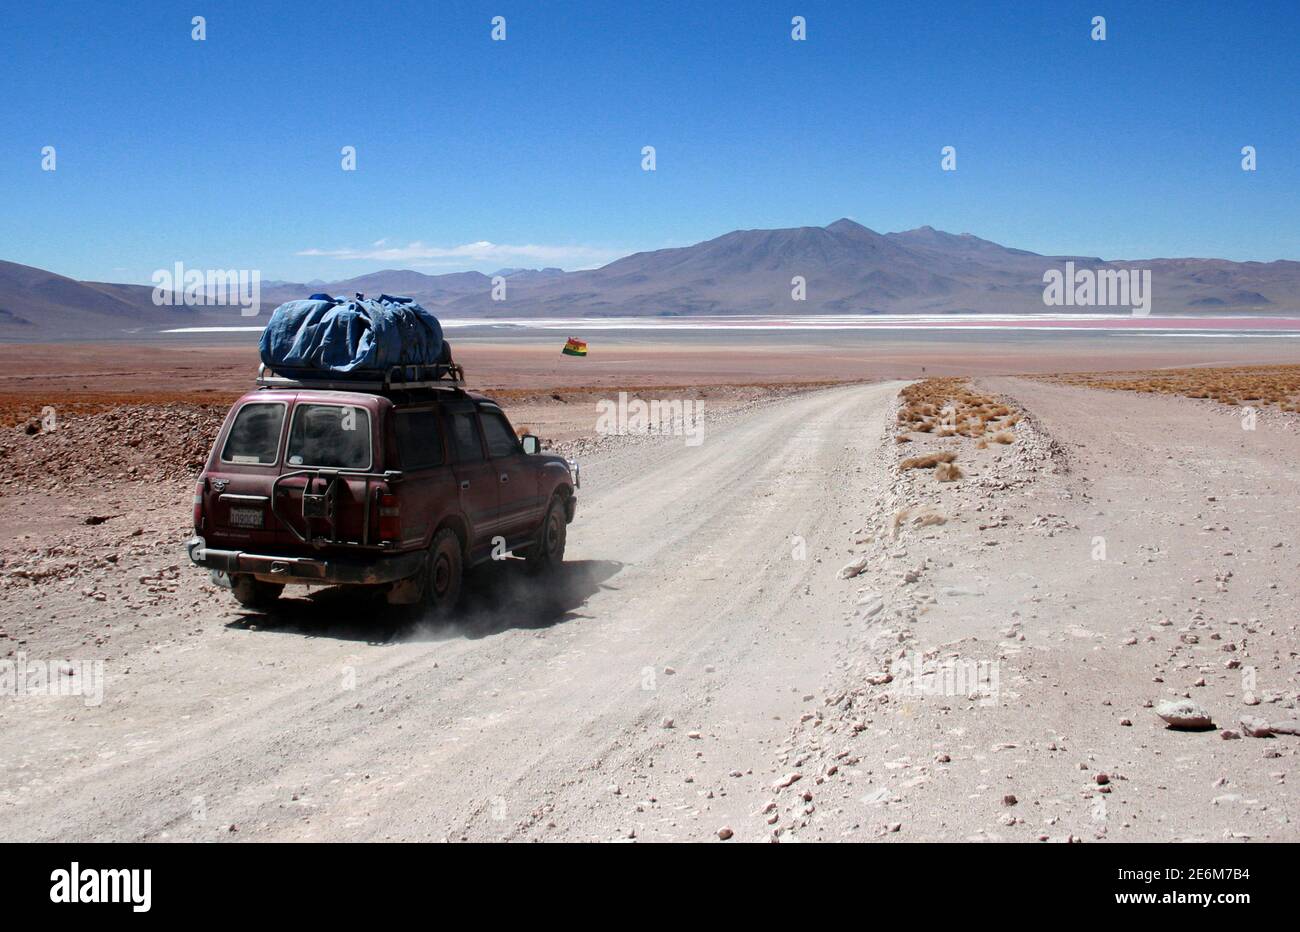 An off-road vehicle stands on October 15, 2009 on a runway in the Altiplano of the Andes on the way from San Pedro de Atacama (Chile) to Uyuni, Bolivia. Tourists from all over the world take the opportunity to explore the 'Reserva Nacional de Fauna Andina Eduardo Abaroa' national park by jeep. Photo: Hauke Schroder | usage worldwide Stock Photo